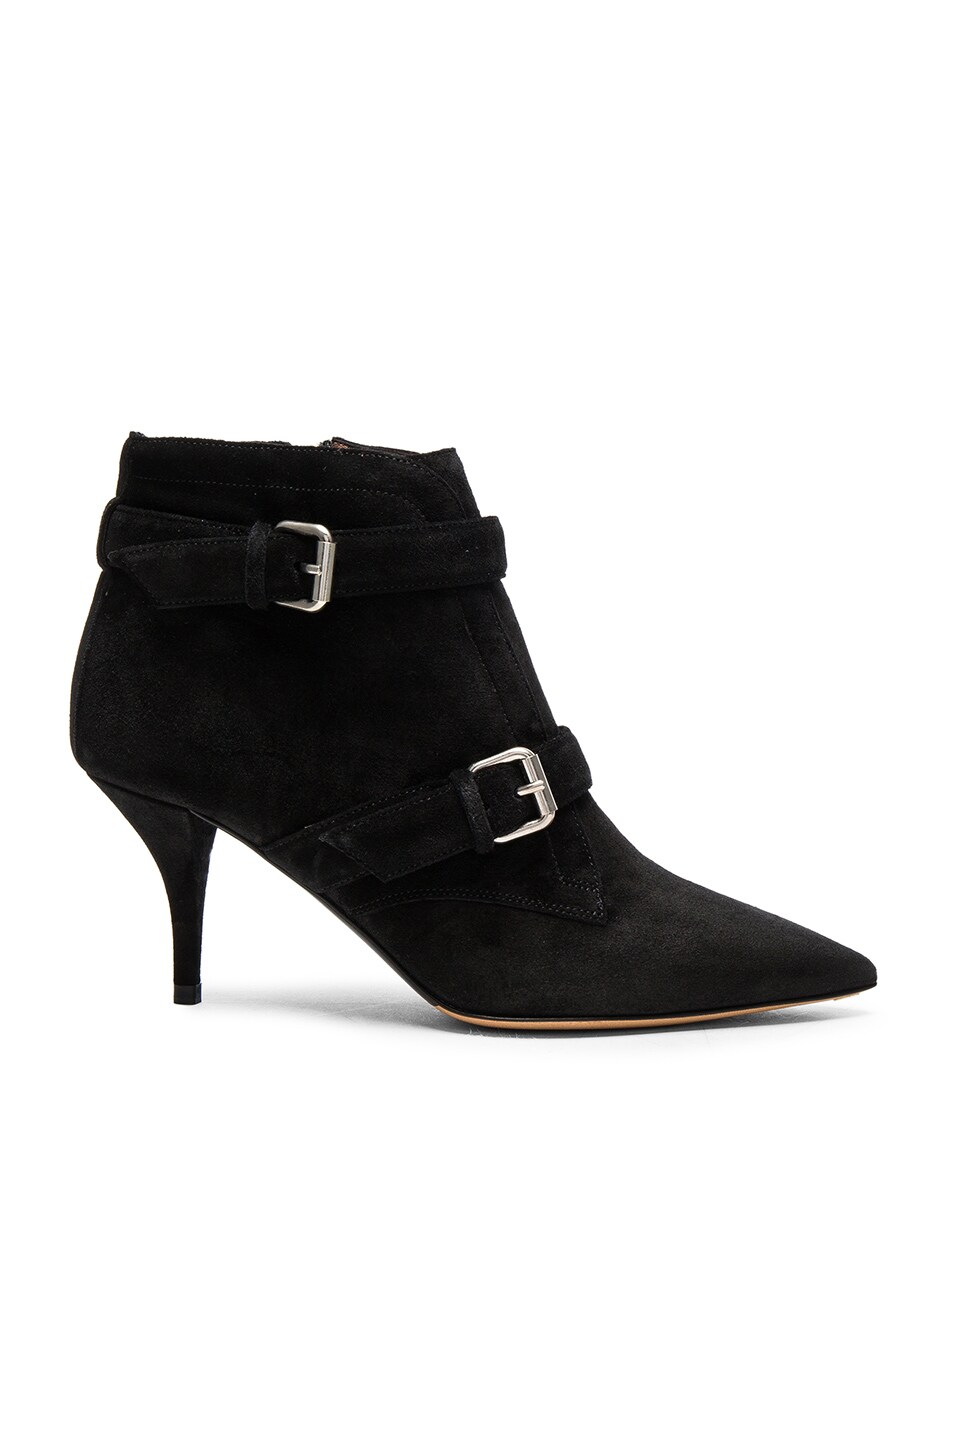 Image 1 of Tabitha Simmons Suede Fitz Booties in Black Suede